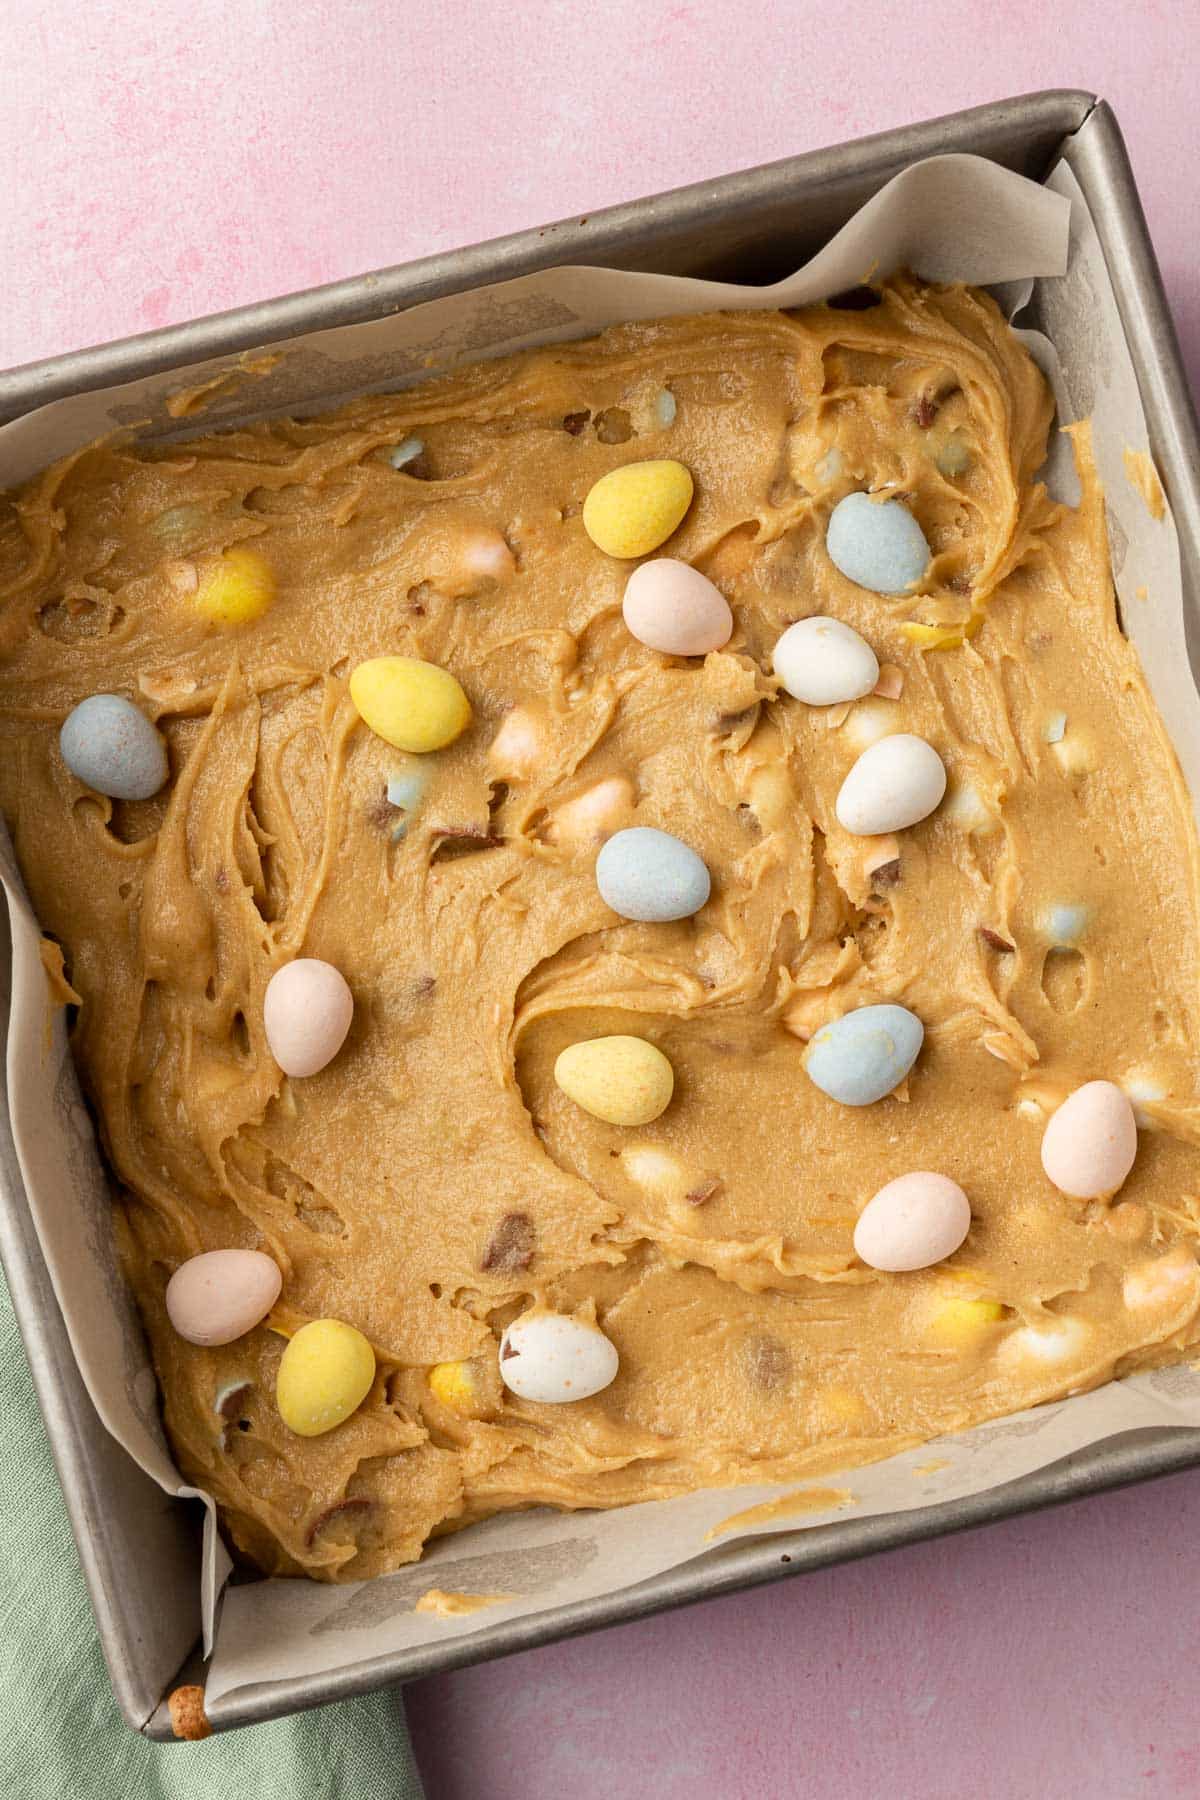 A square baking pan of gluten-free blondie batter topped with mini chocolate eggs before baking in the oven.